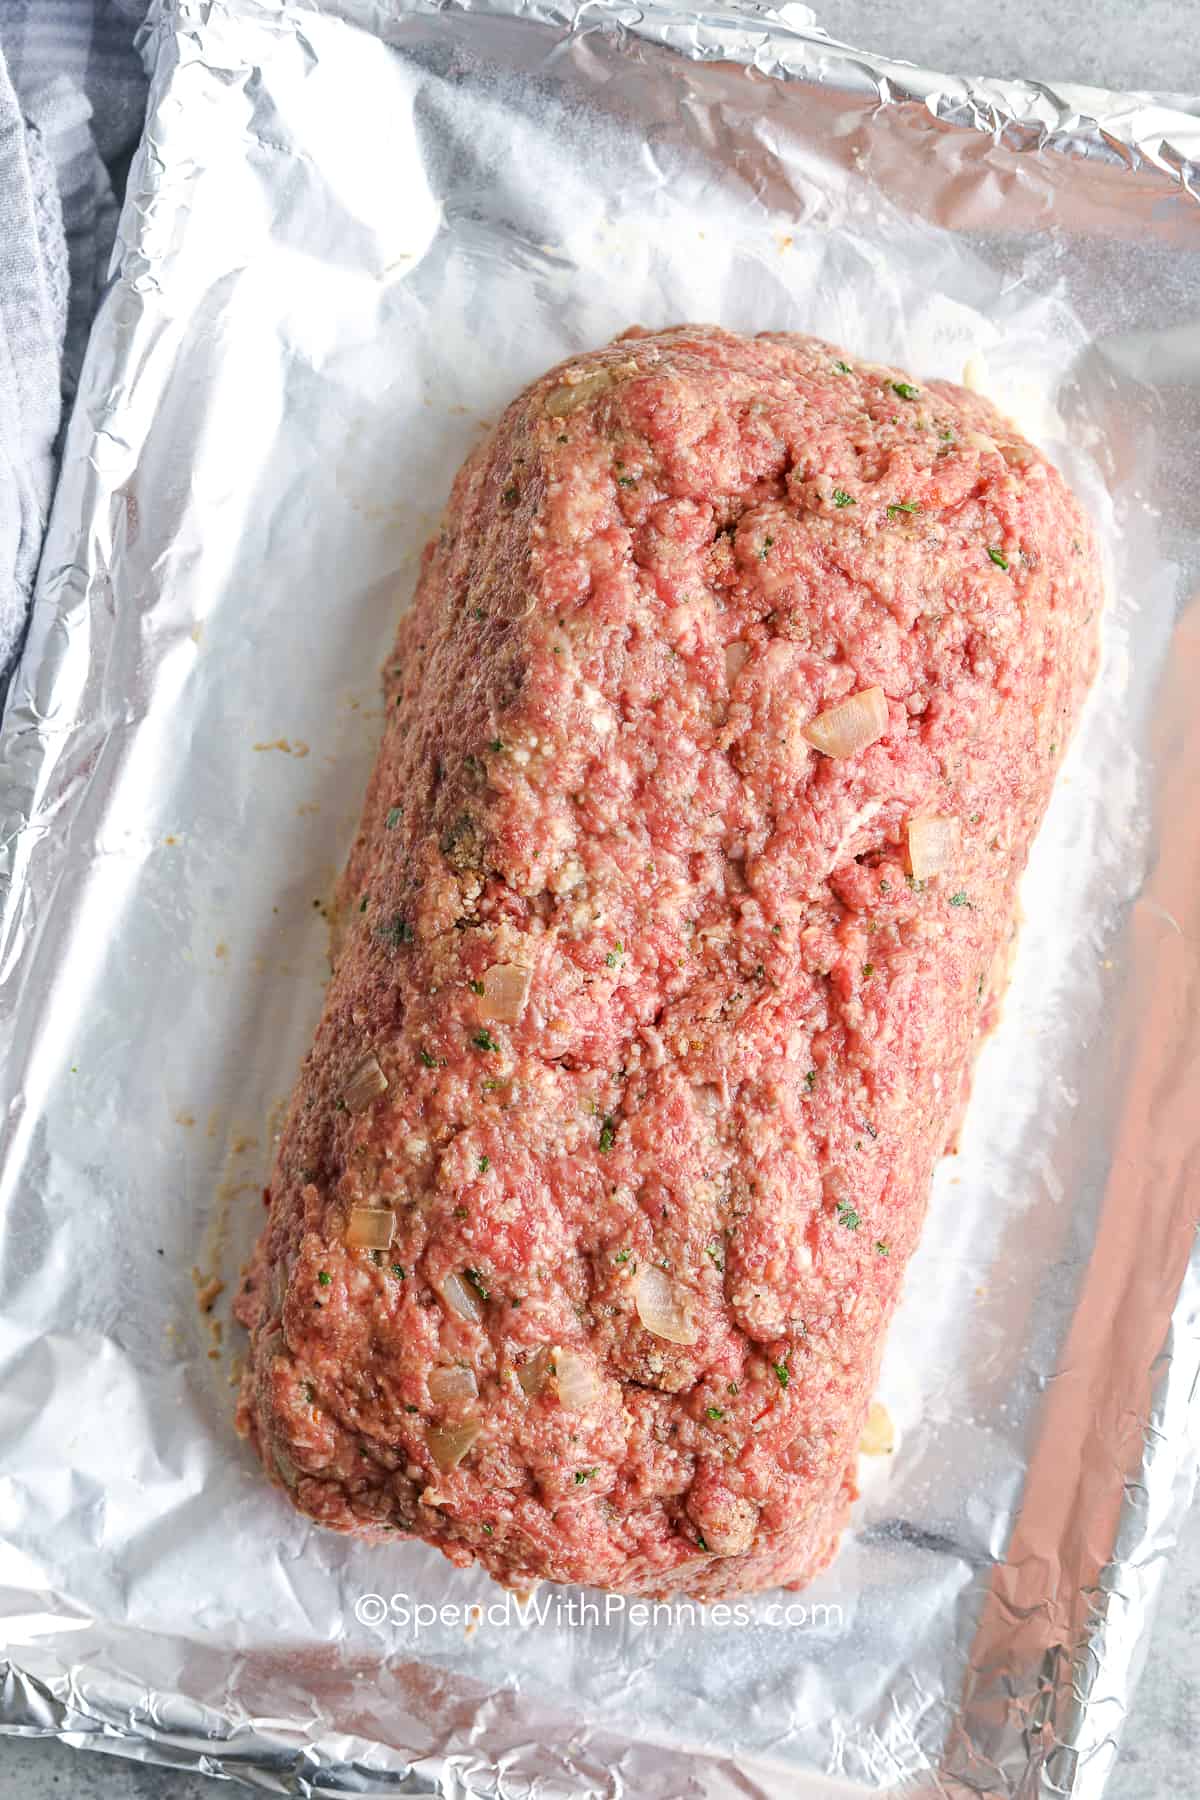 an uncooked formed meatloaf on a foil lined pan